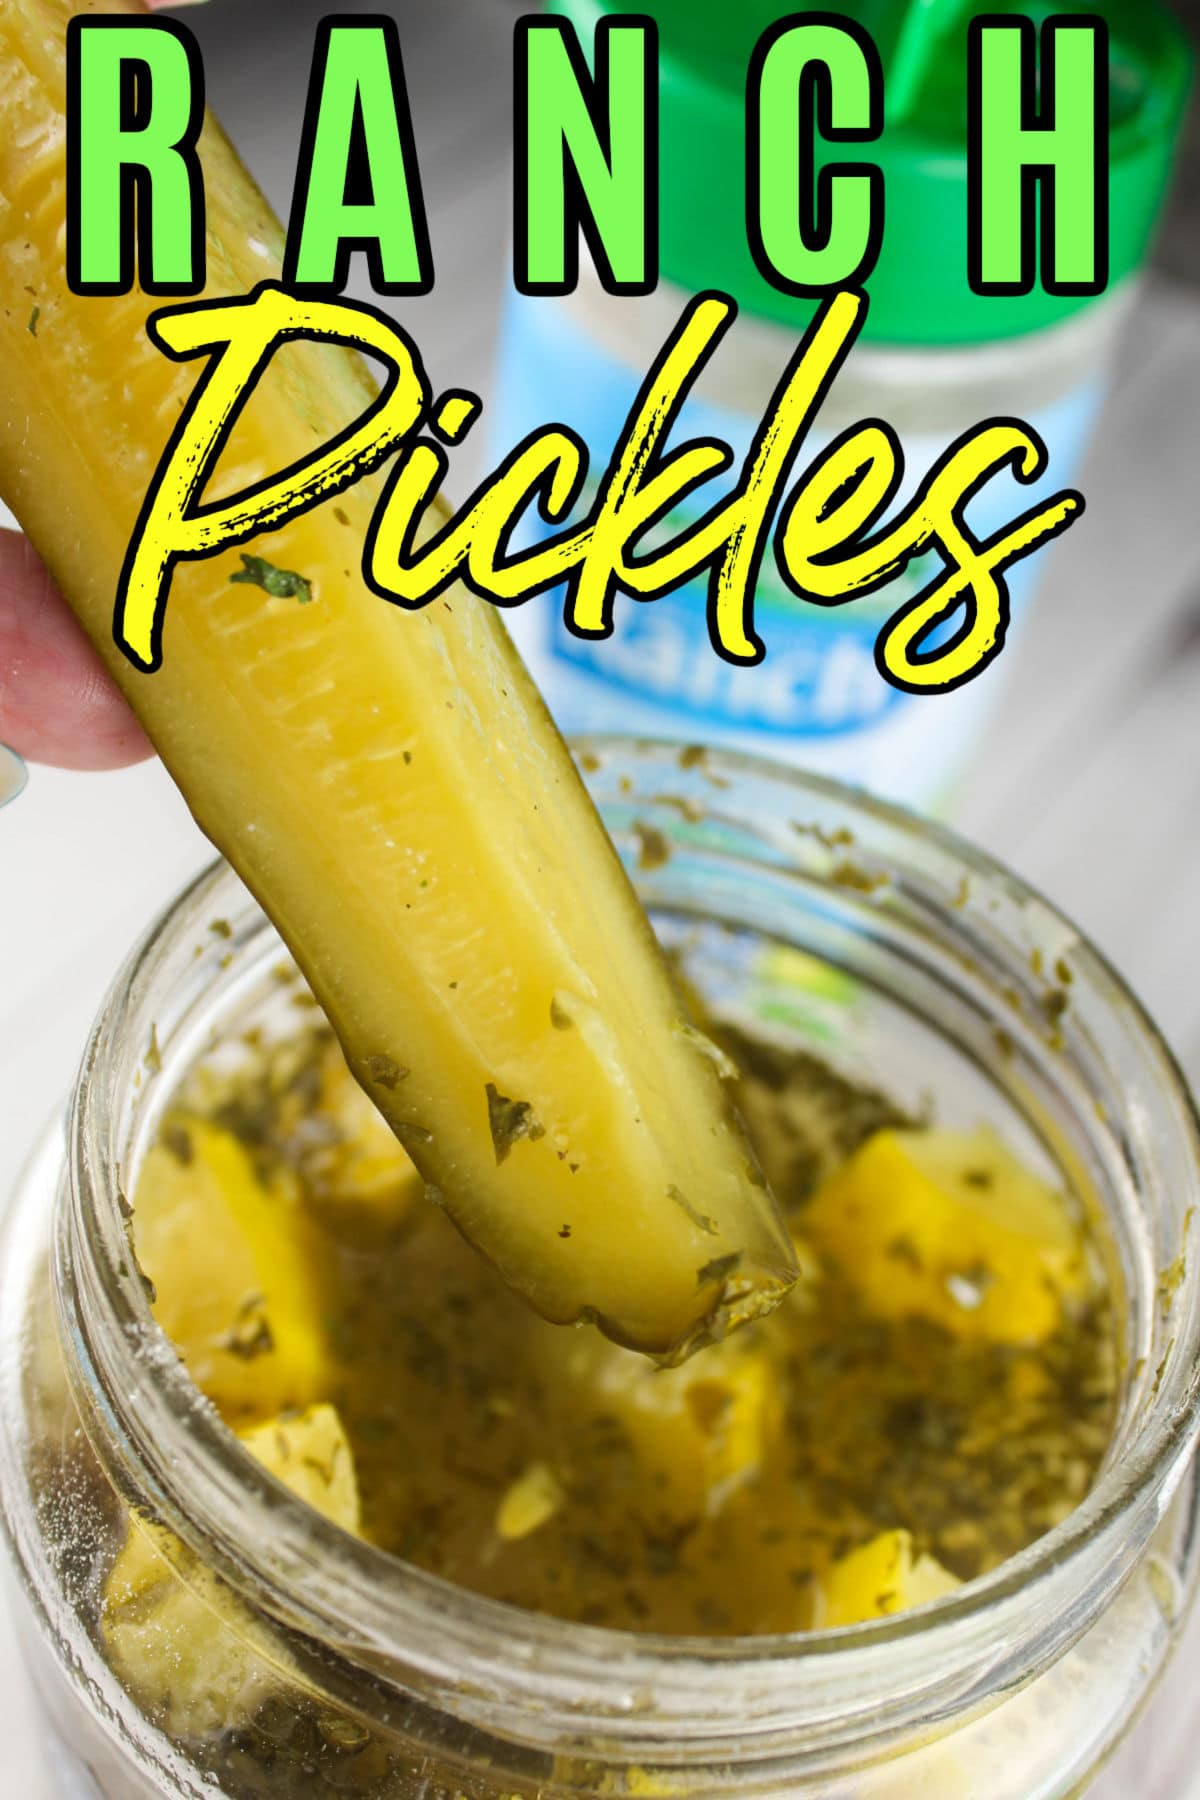 Ranch Pickles take Dill Pickles to the next level! They add a creaminess to your pickles you never knew you needed! I've done this to every jar of Dill Pickles in the house! via @foodhussy